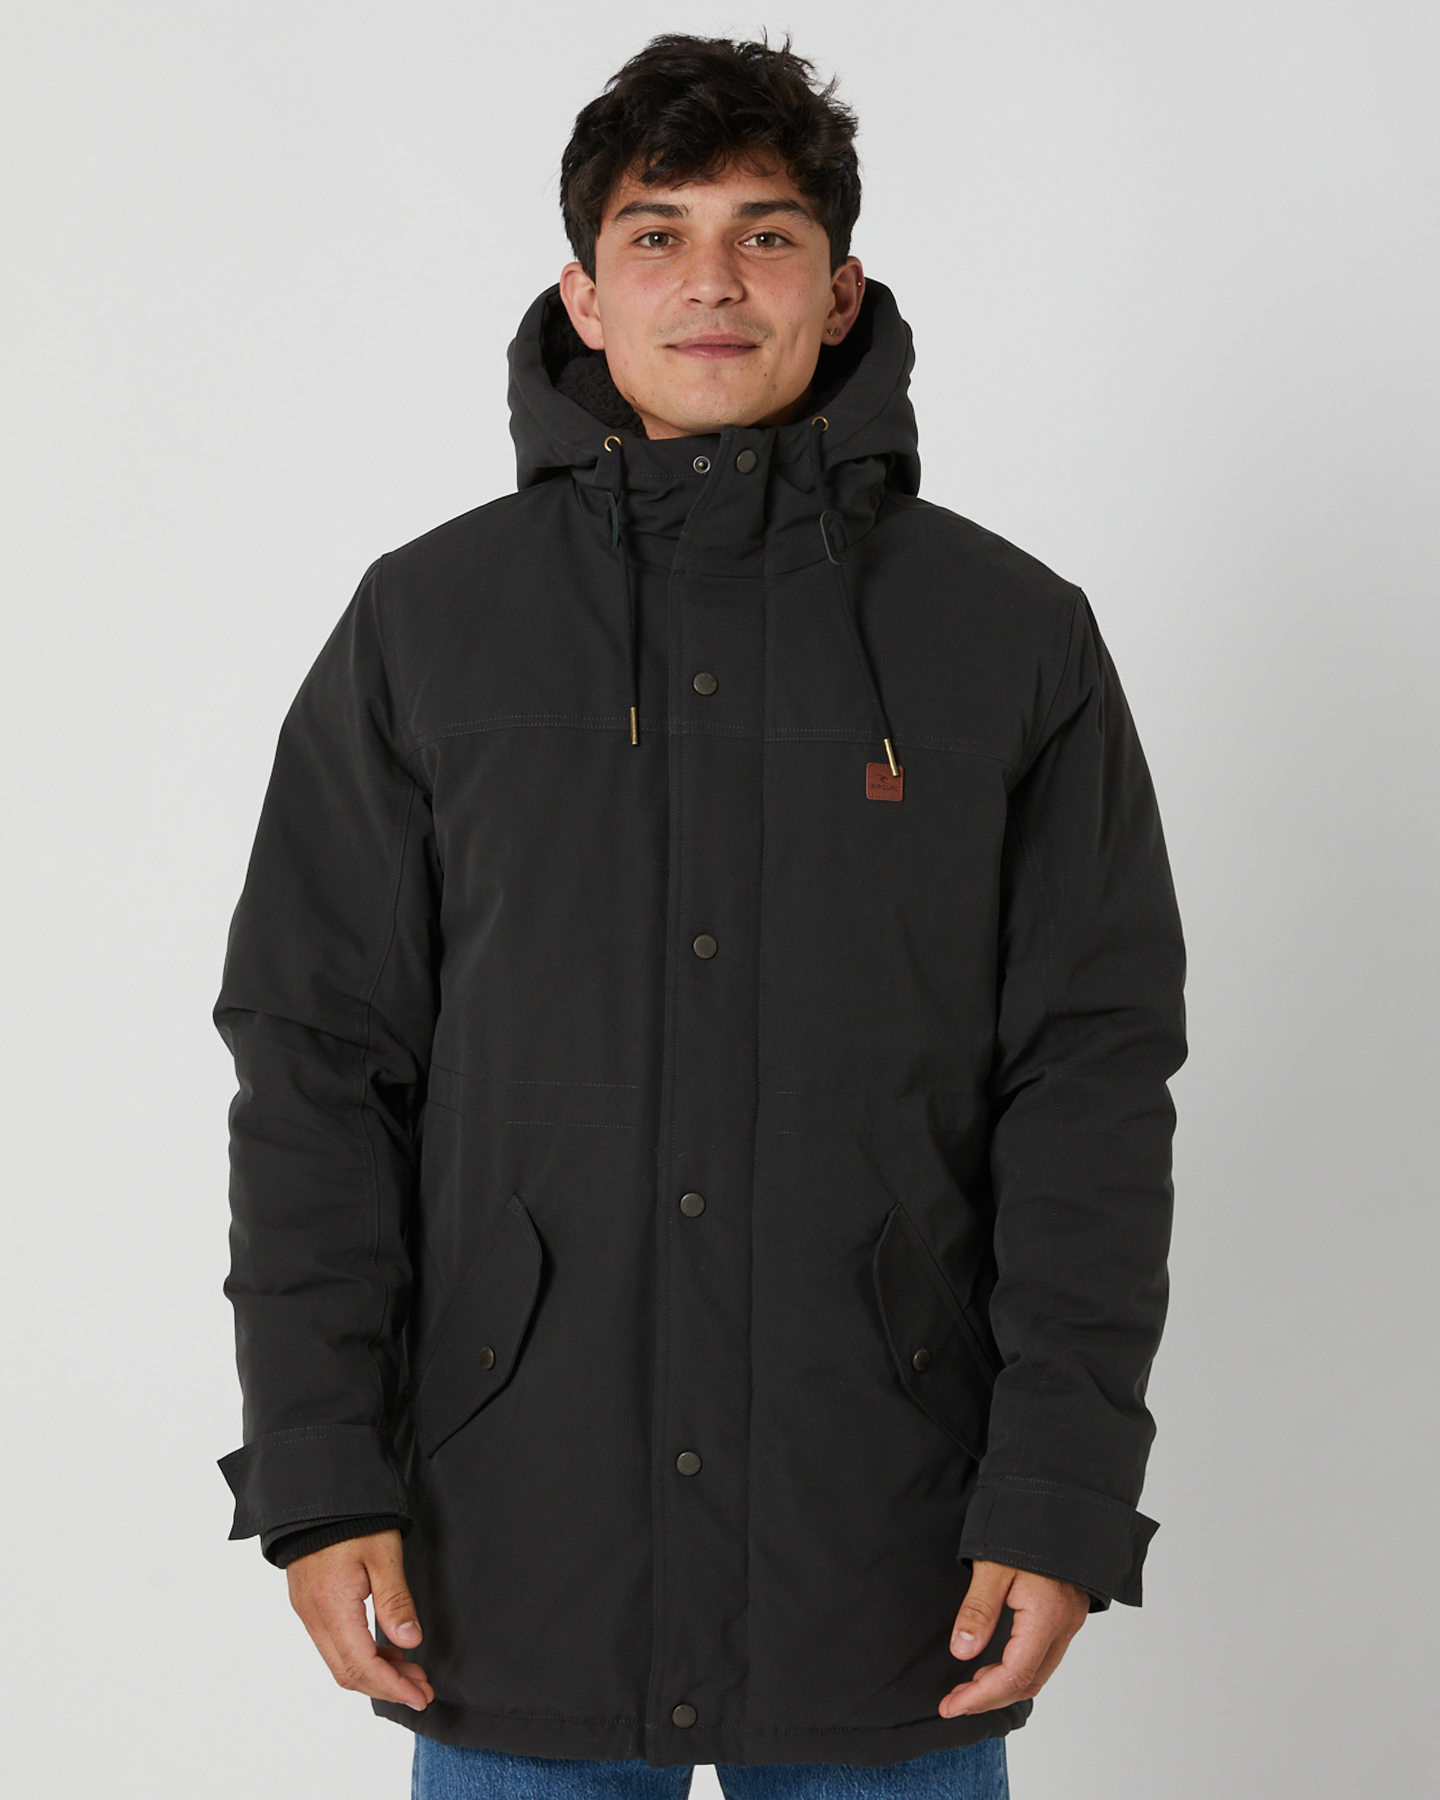 Rip Curl Anti Series Exit Jacket - Washed Black | SurfStitch